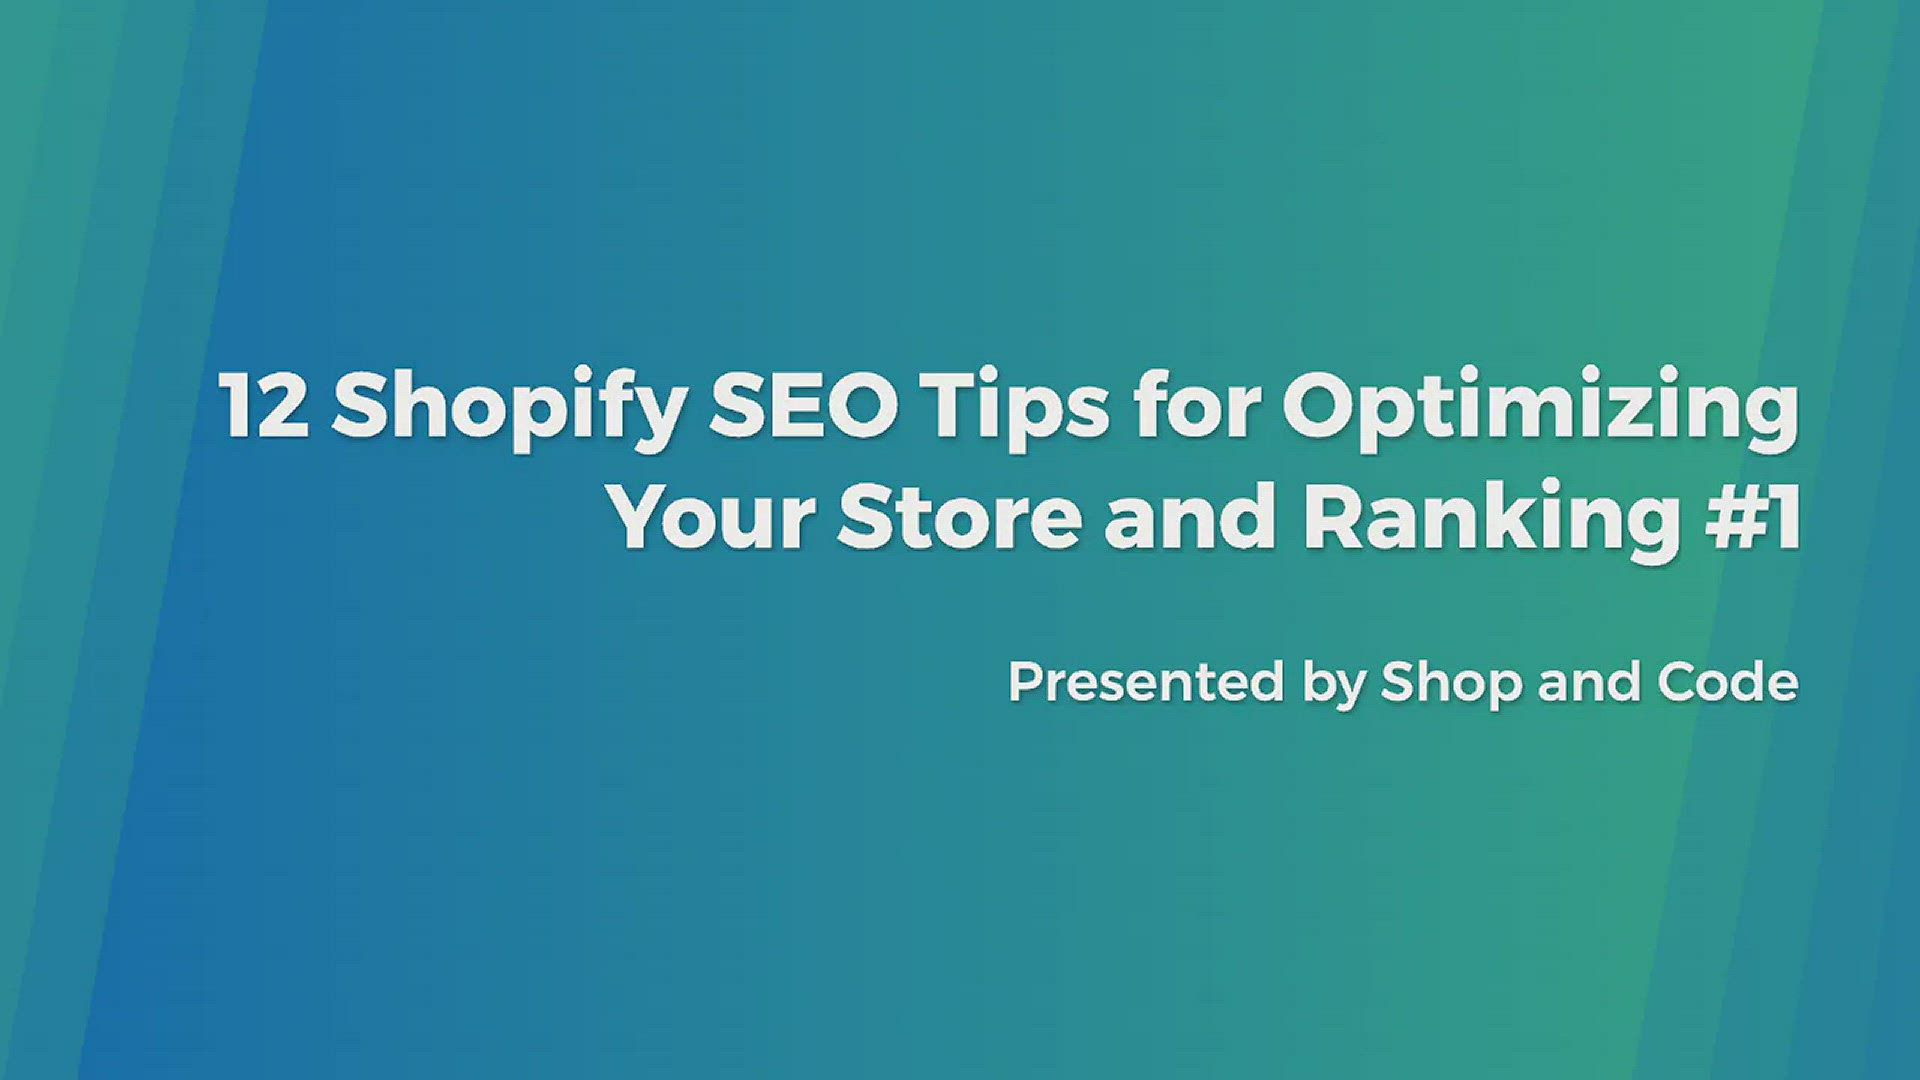 'Video thumbnail for 12 Shopify SEO Tips for Optimizing Your Store and Ranking #1'